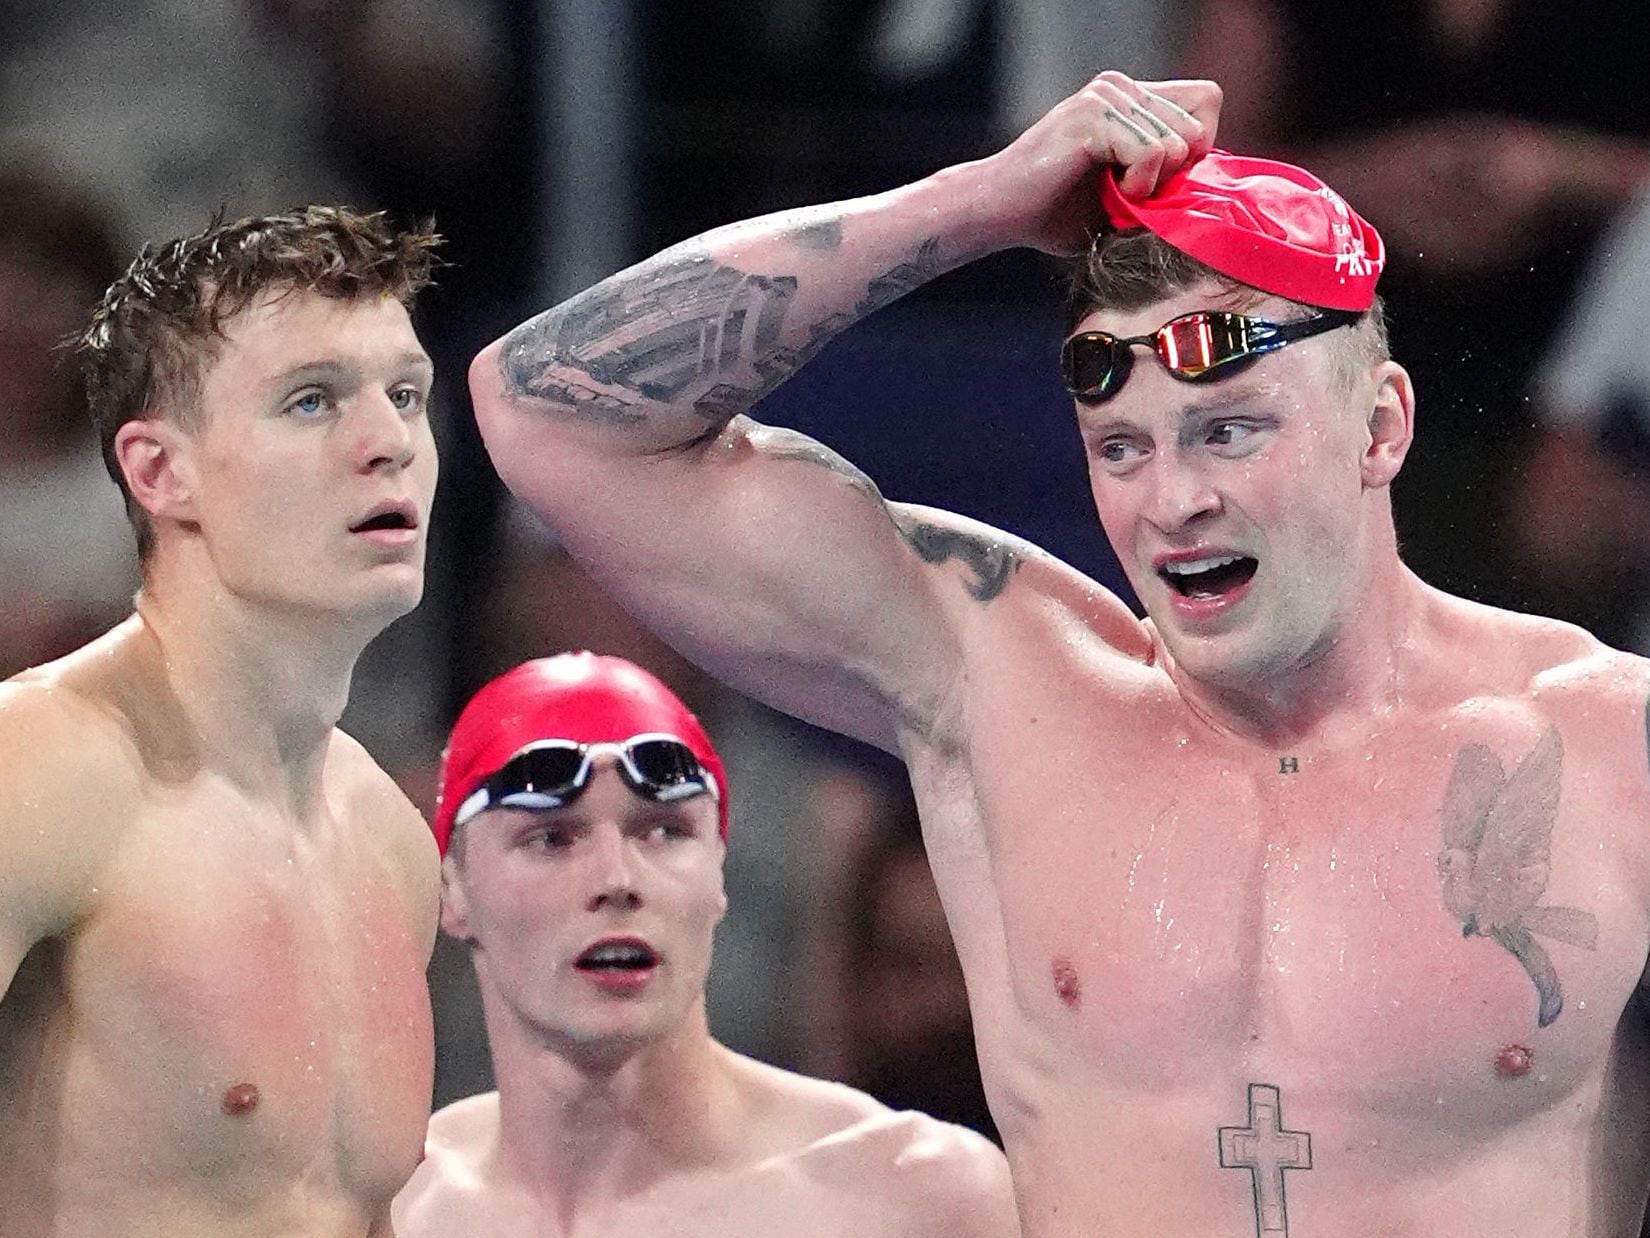 Adam Peaty speaks on China doping controversy and tells anti-doping authorities to 'do their job'